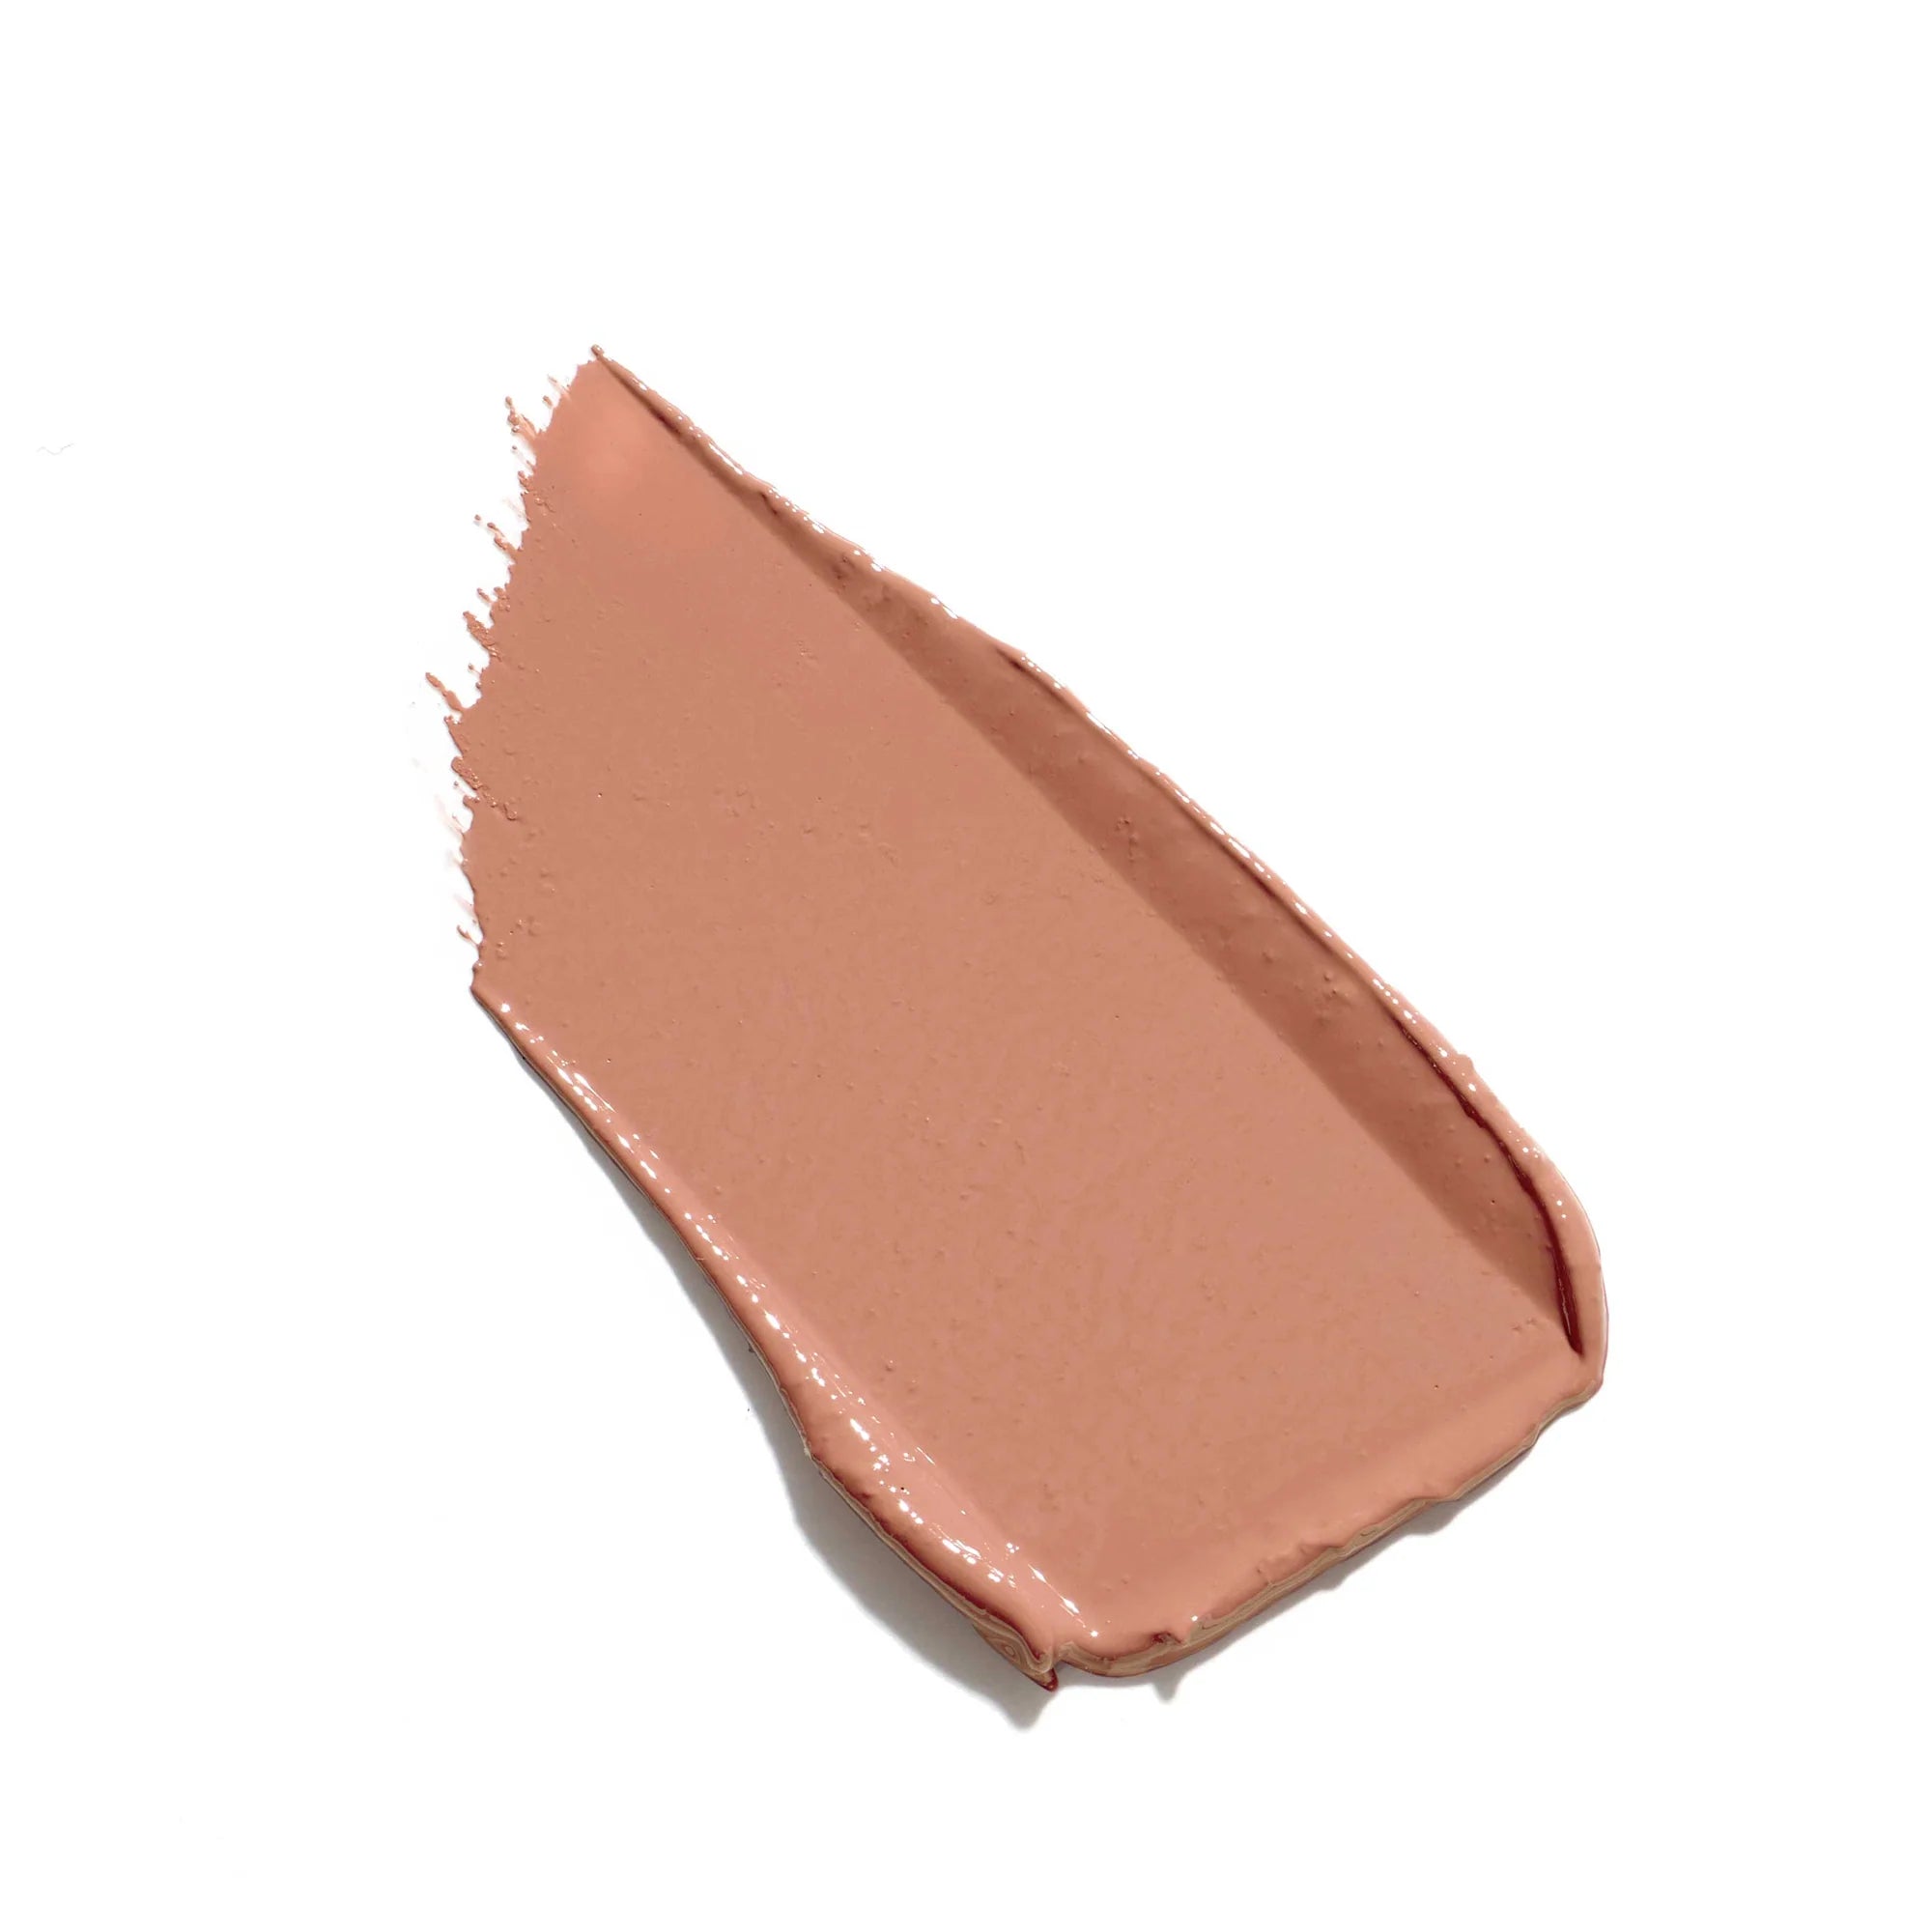 Jane Iredale's ColorLuxe Hydrating Cream Lipstick - swatch and color Toffee - warm medium beige